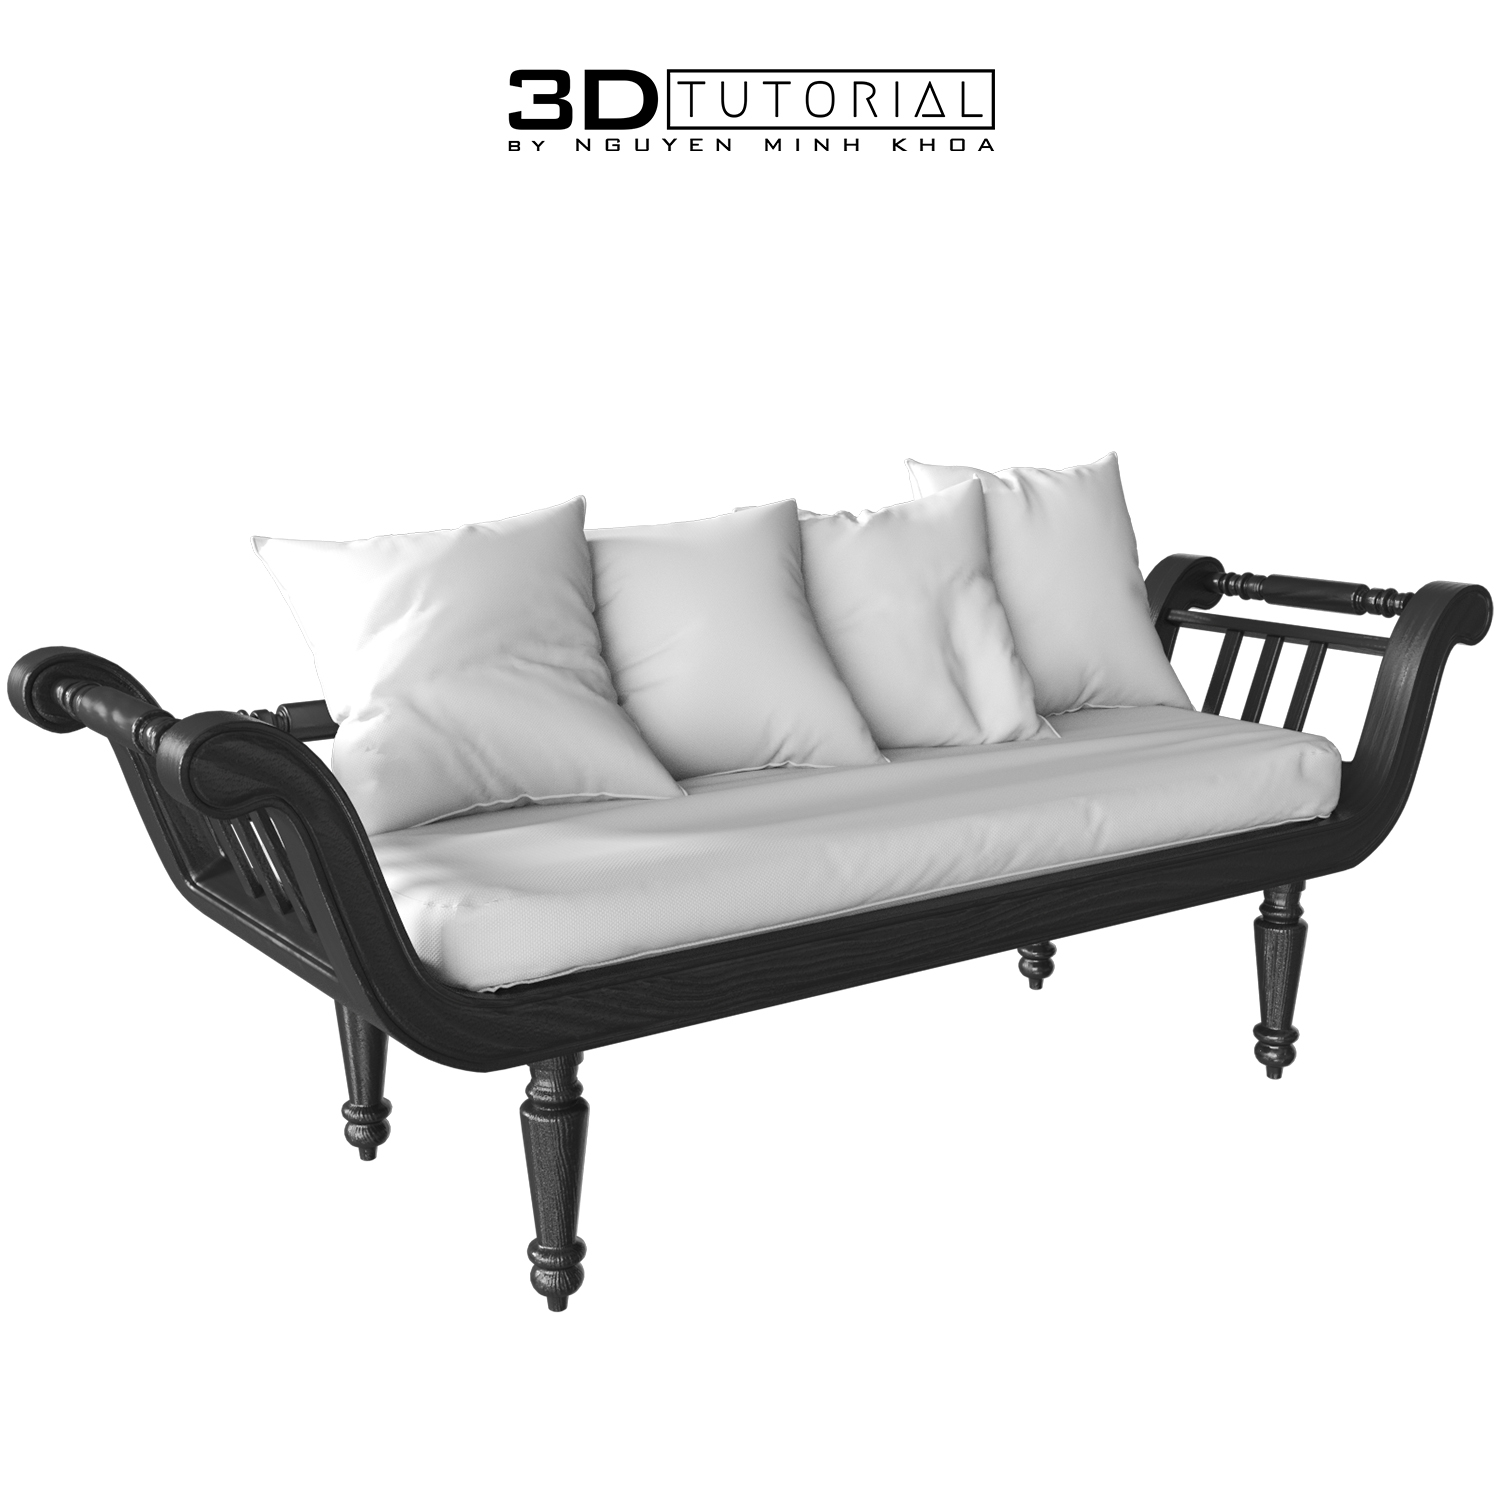 Download Free 3D Indochine Bench 3 Model By Nguyen Minh Khoa